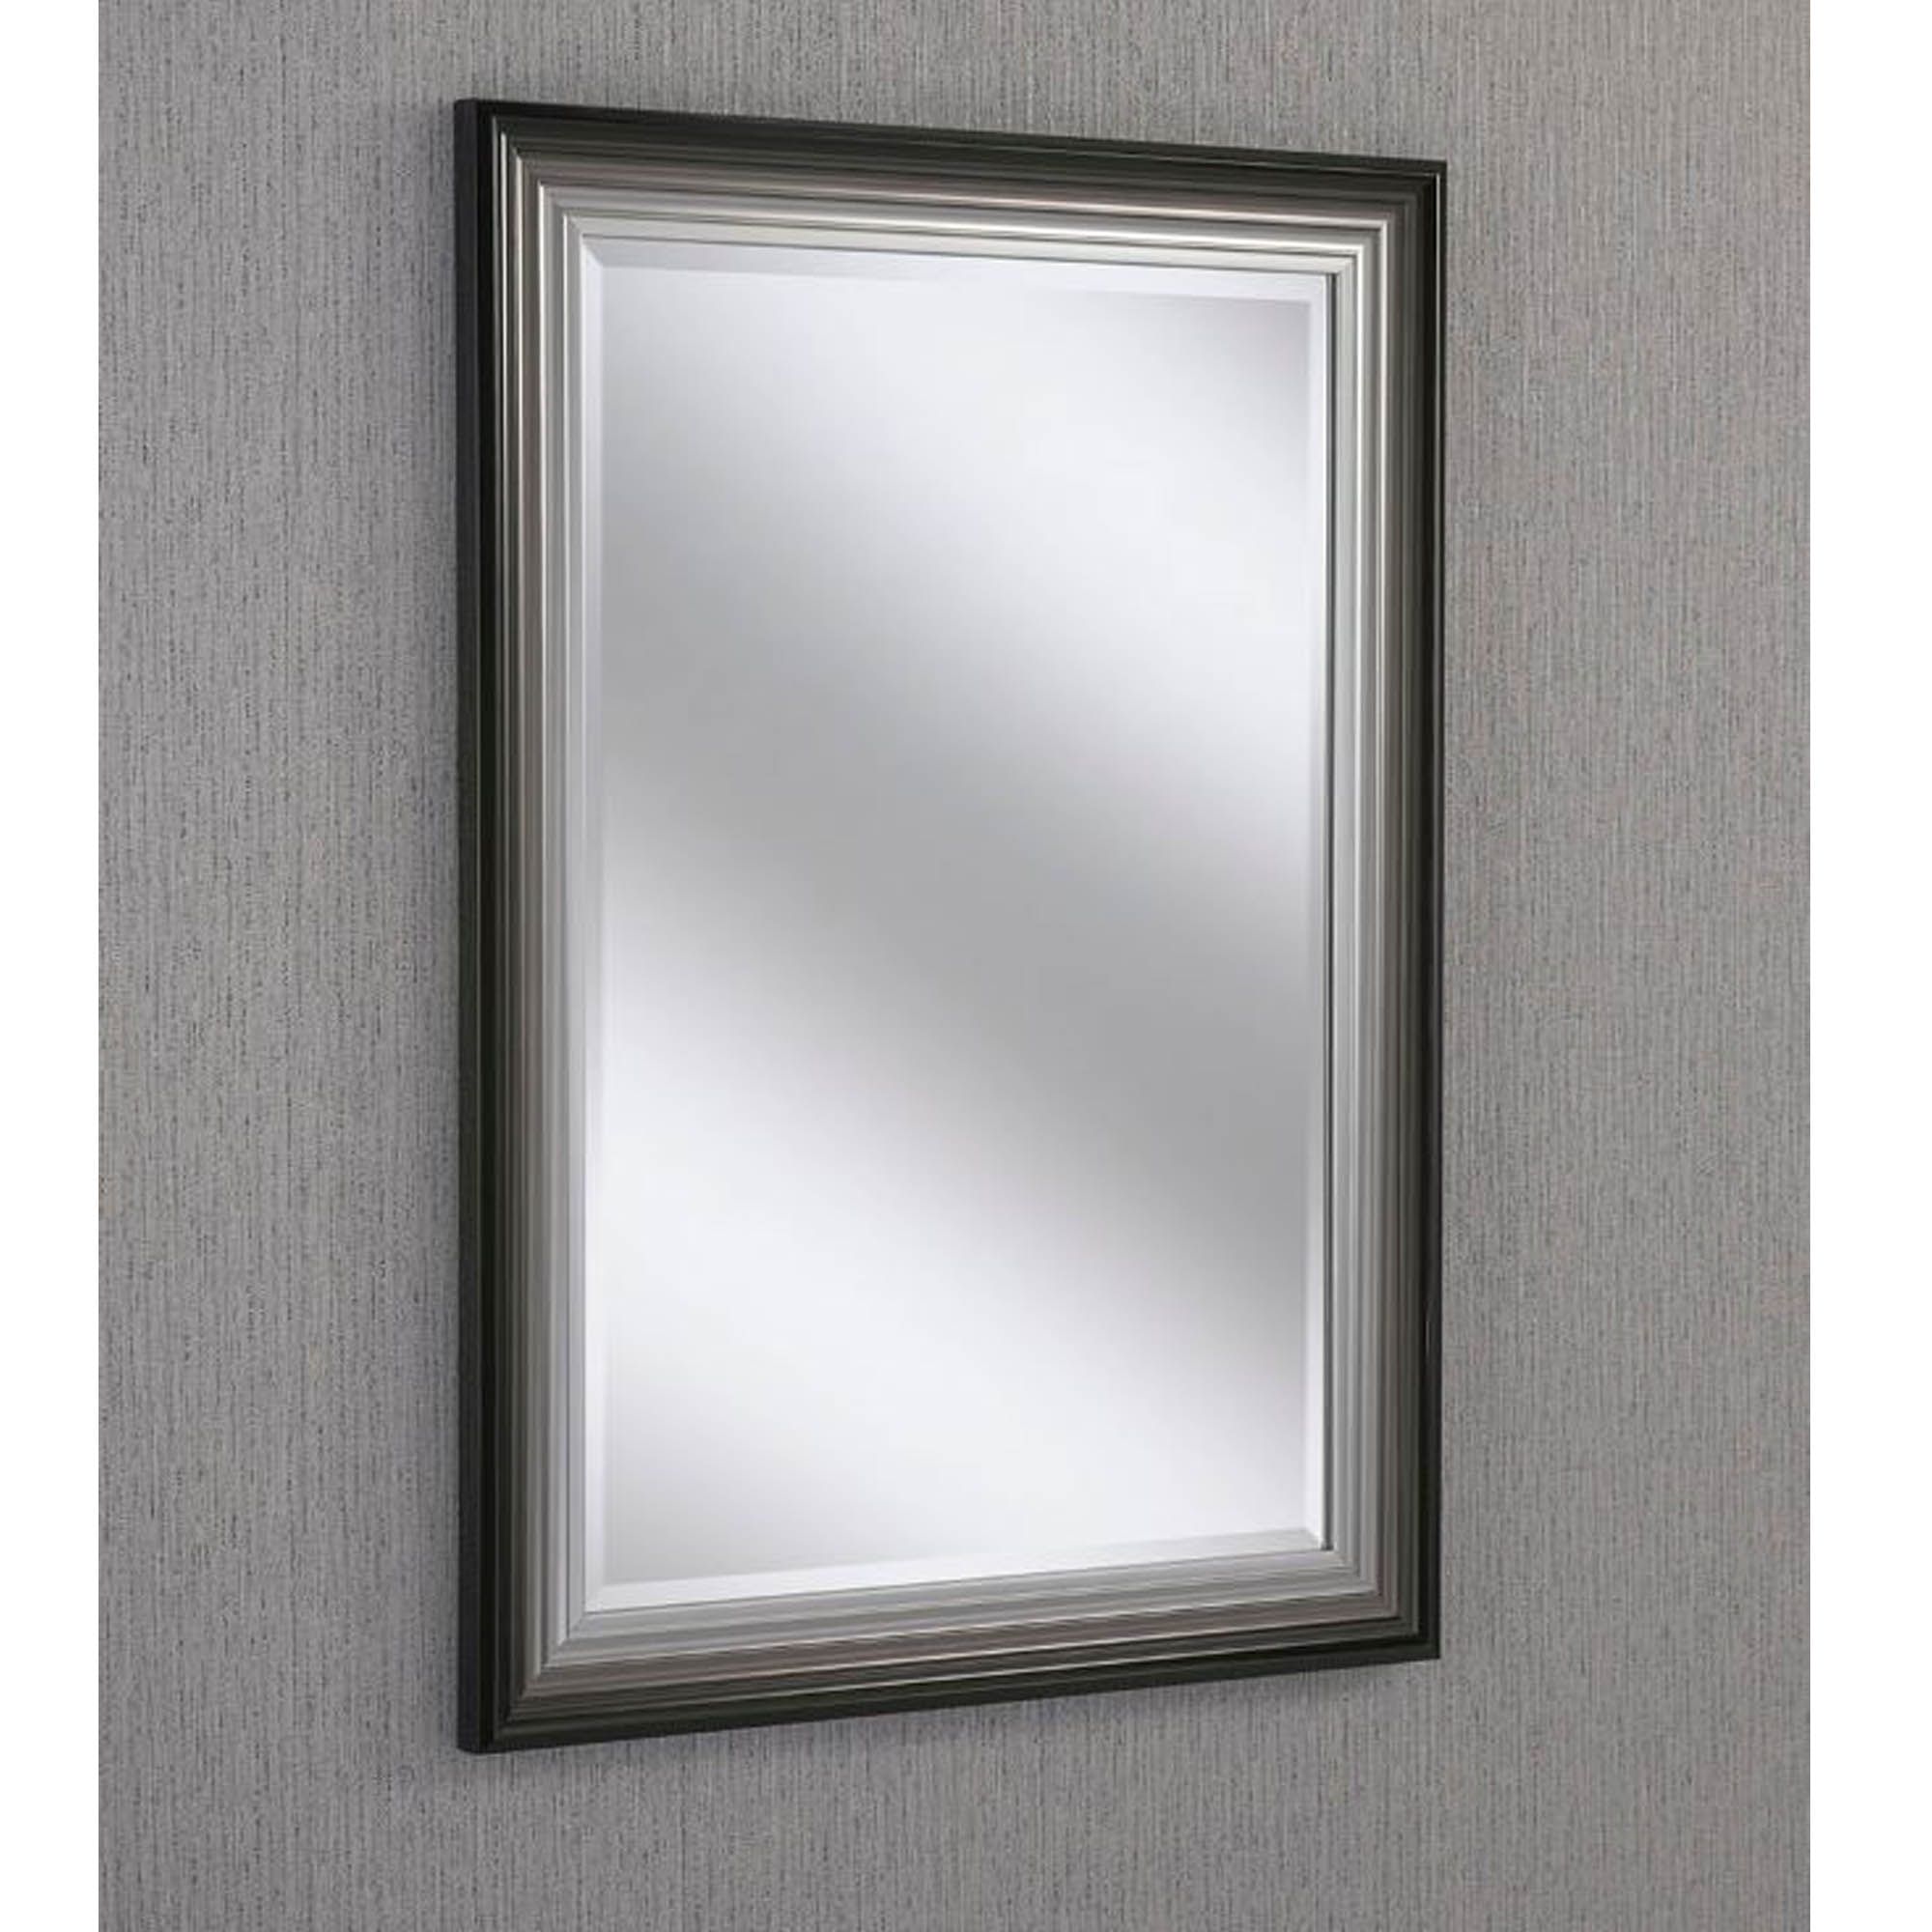 Rectangular Black/Silver Beveled Contemporary Wall Mirror | Hd365 In Black Beaded Rectangular Wall Mirrors (View 13 of 15)